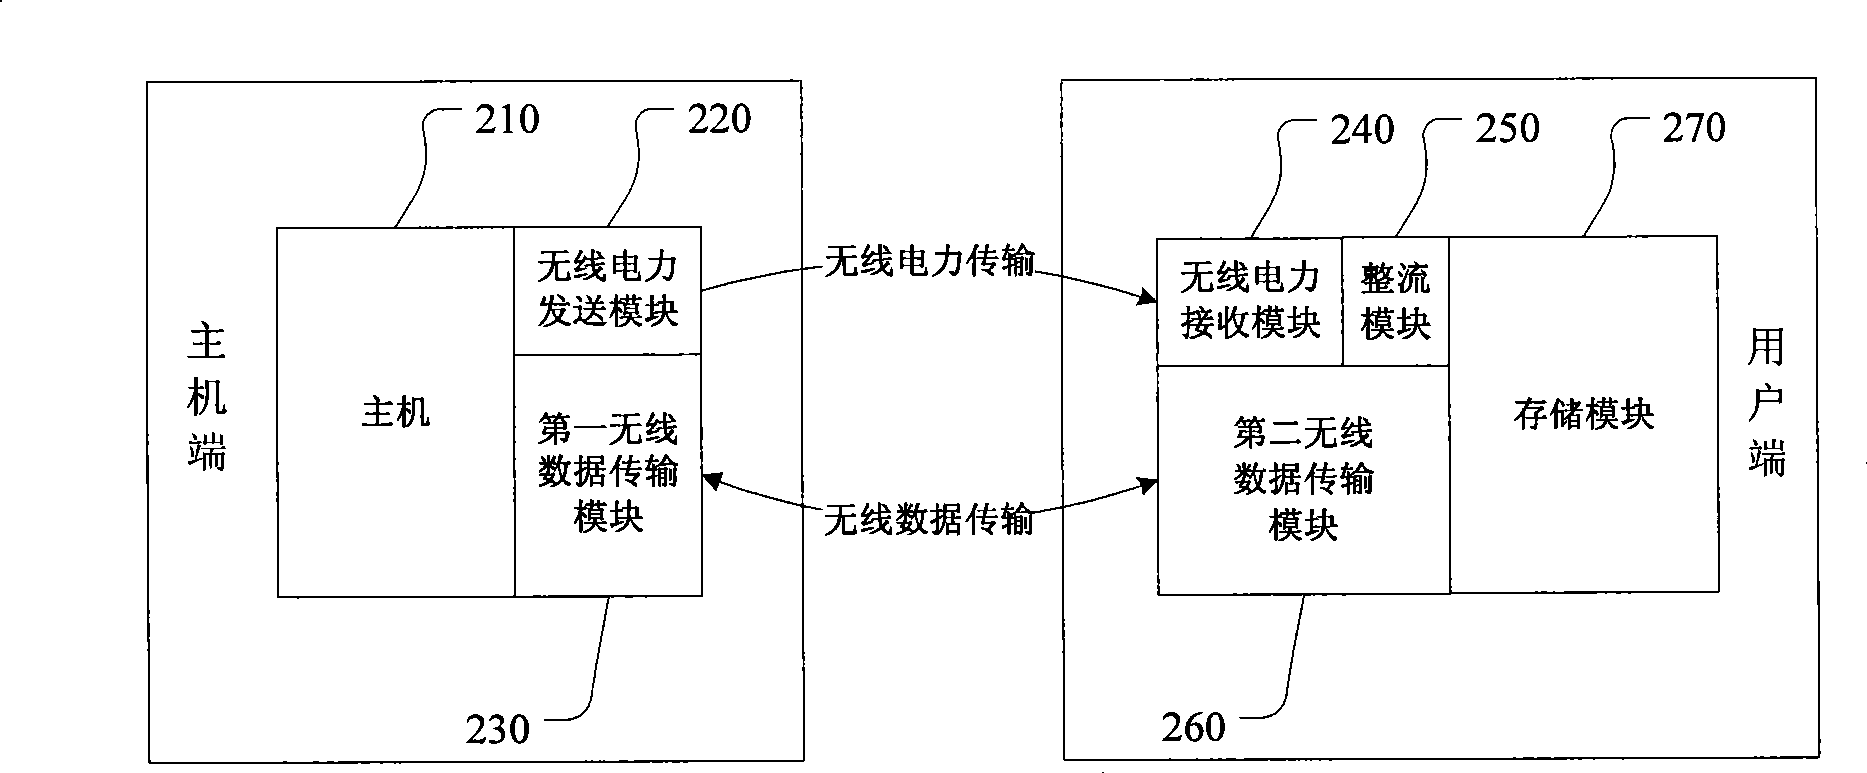 Wireless memory device, system and method